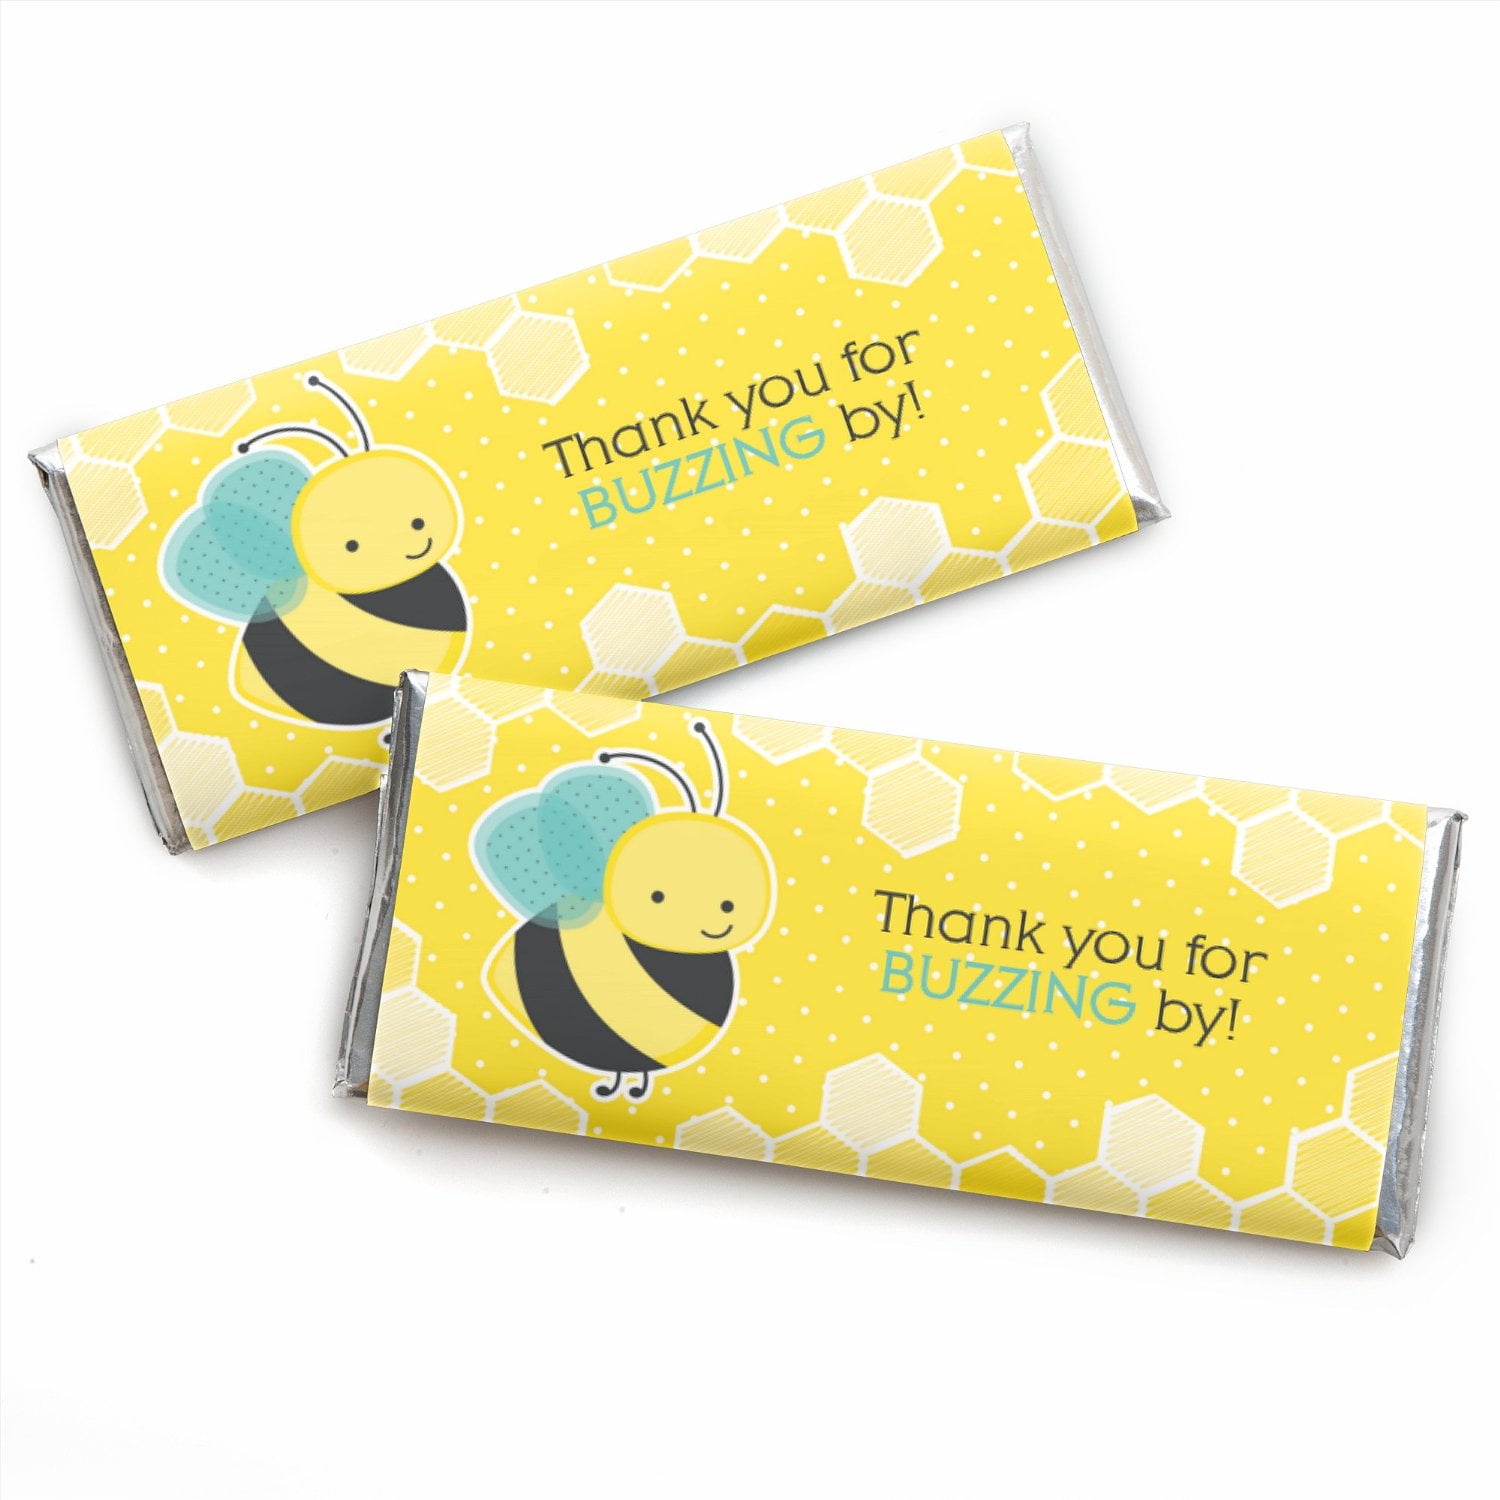 Winoo Design Gold Mini Thank You Cards Small Business - 100 PK - Flat Off  White